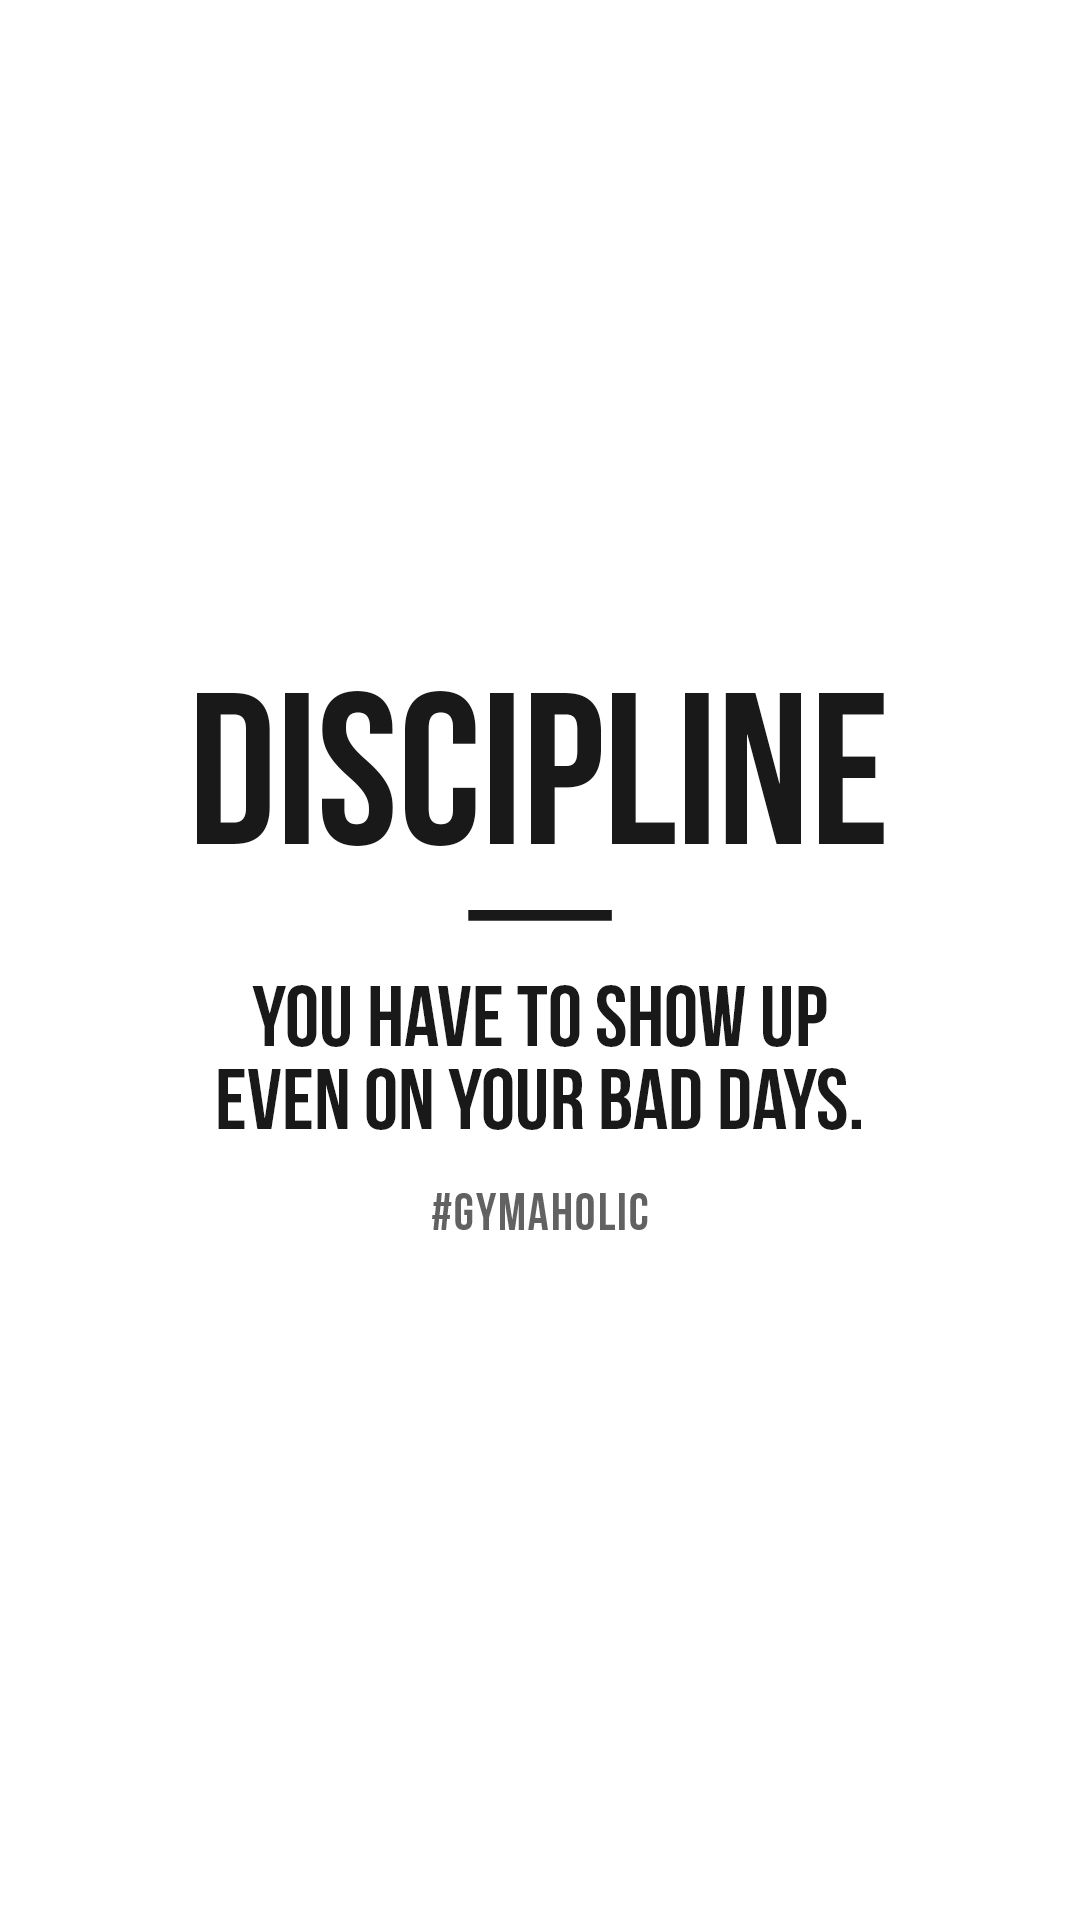 Discipline: you have to show up even on your bad days.